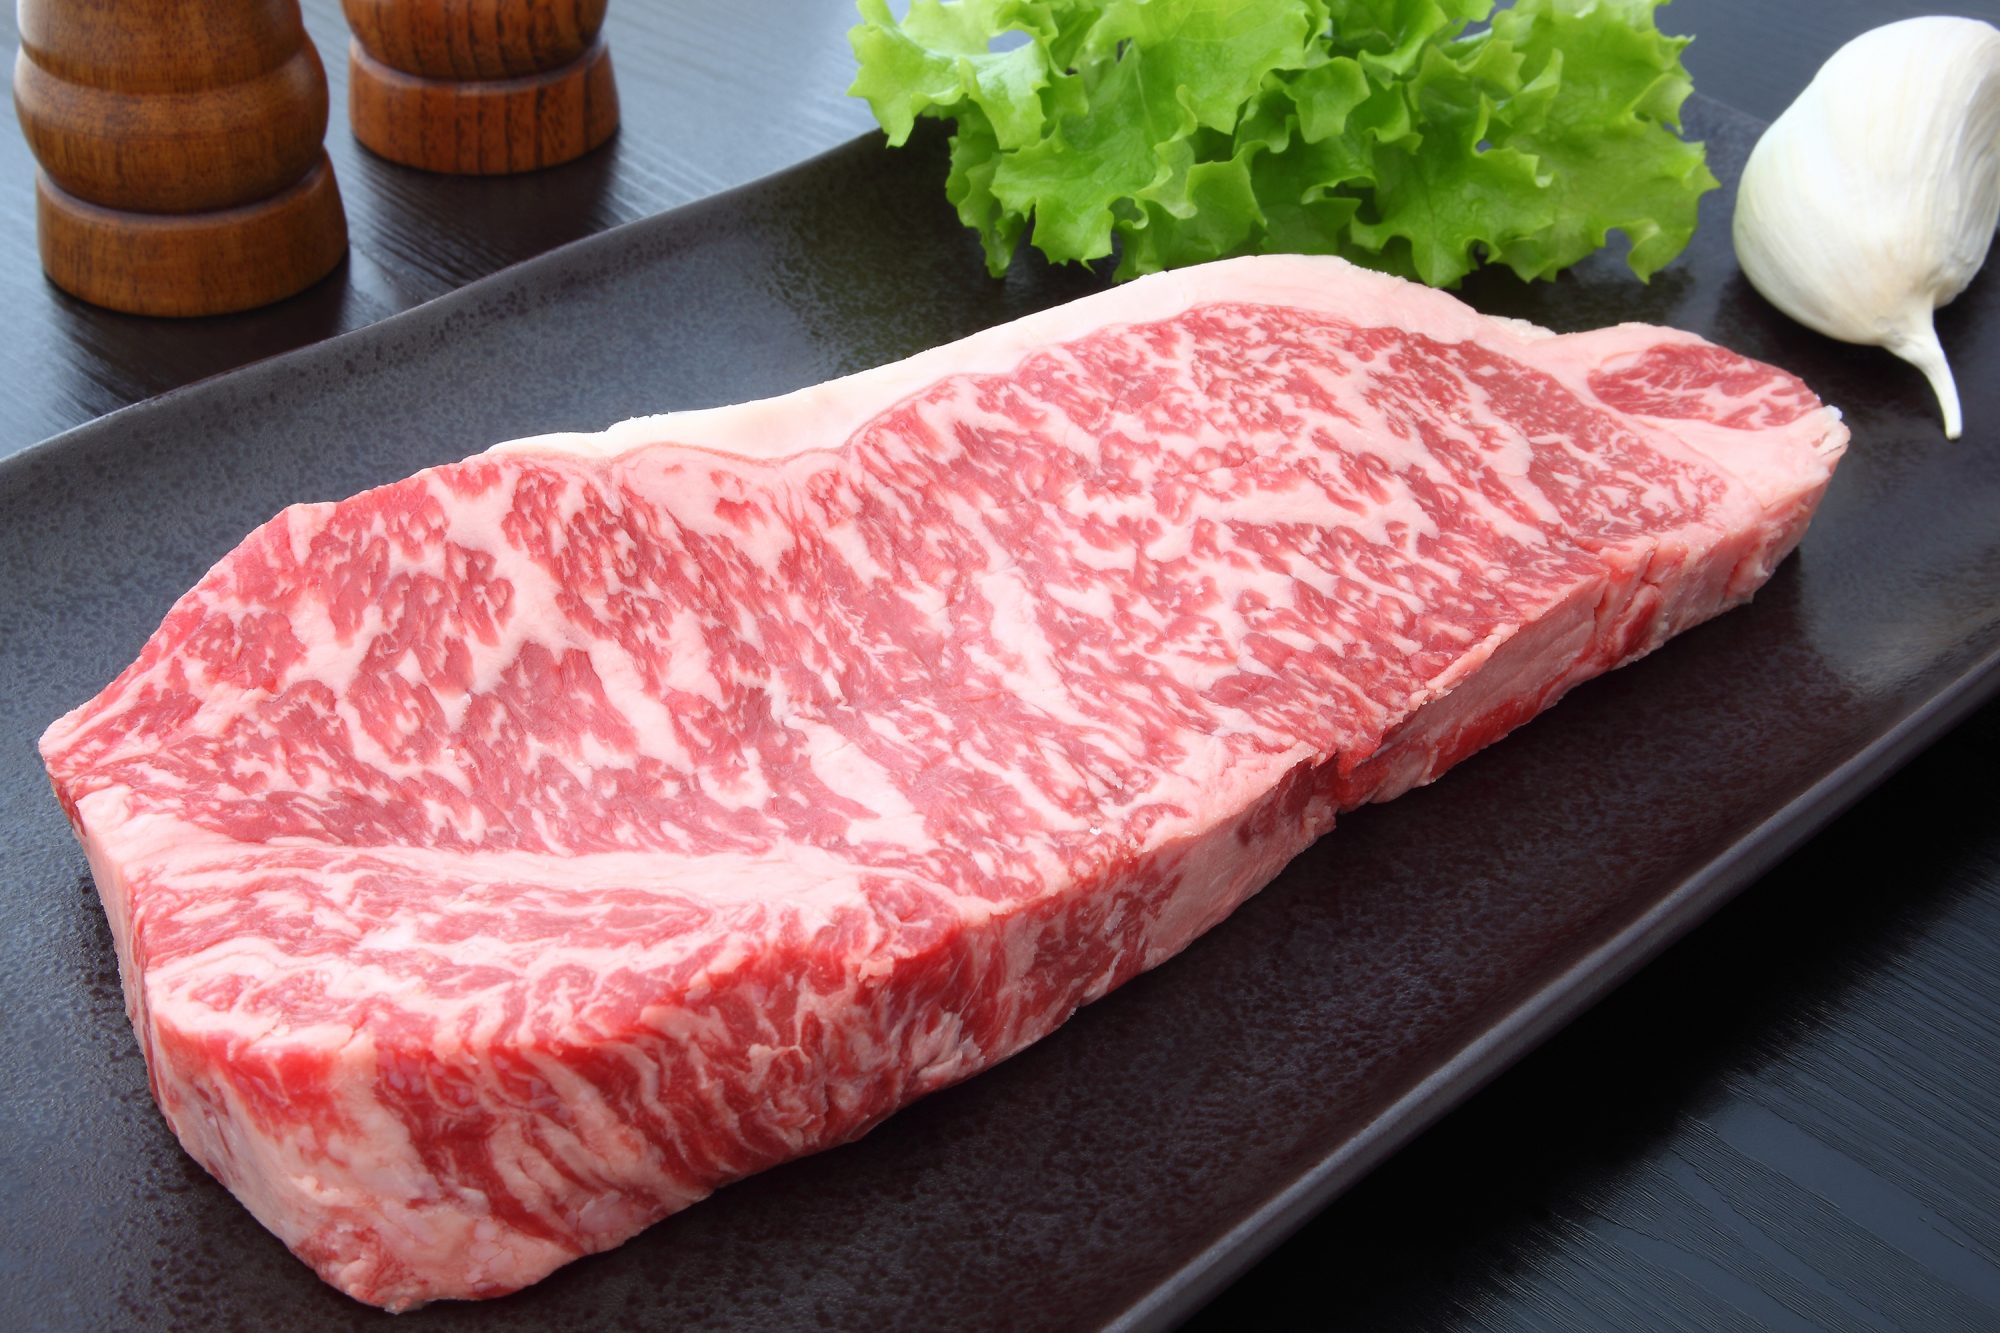 What to check before buying steak online?